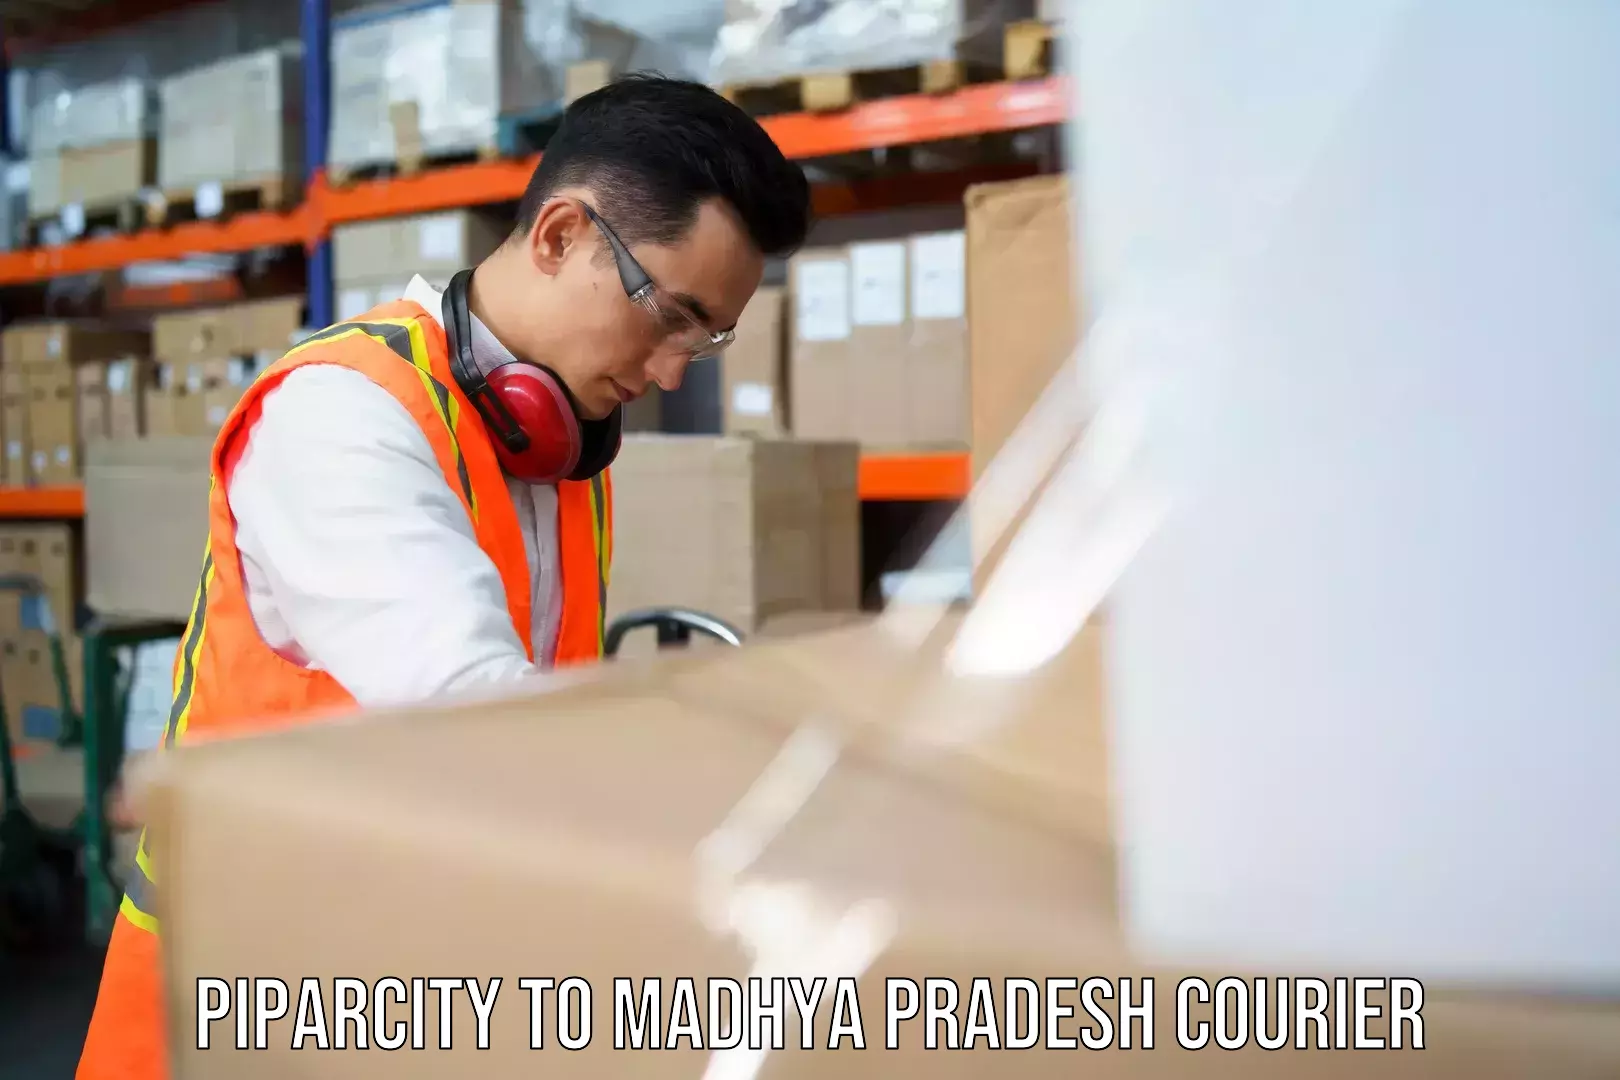 Dynamic courier services in Piparcity to Madhya Pradesh